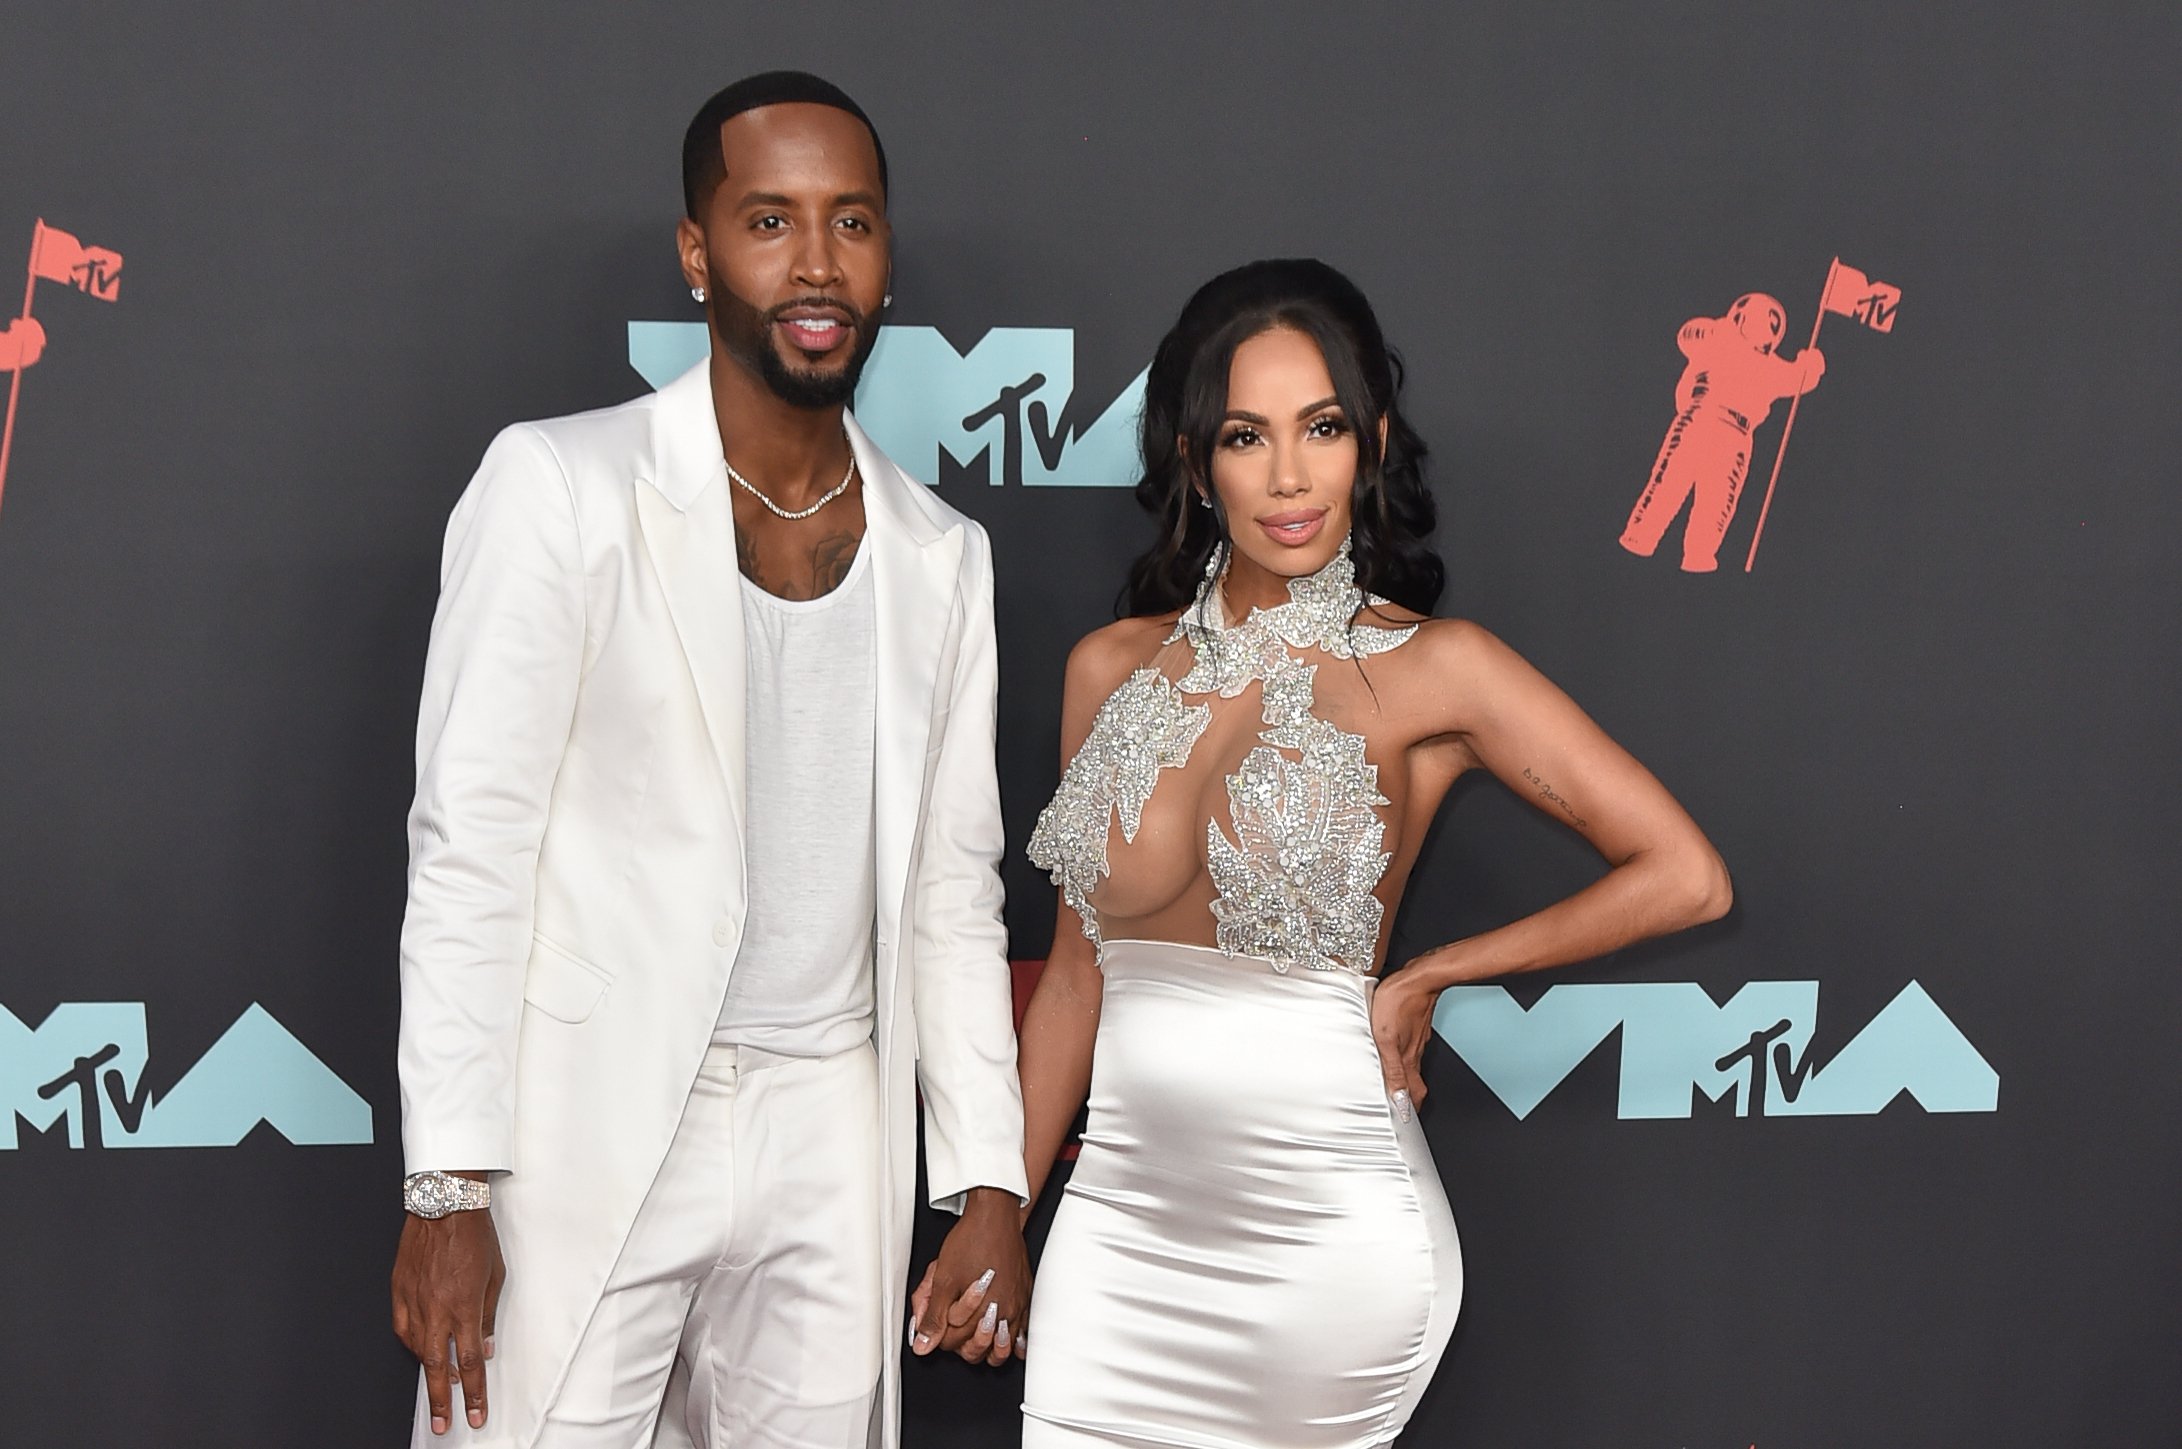 Safaree Samuels and Erica Mena at the 2019 MTV Video Music Awards at Prudential Center on August 26, 2019 in Newark, New Jersey | Photo: Getty Images